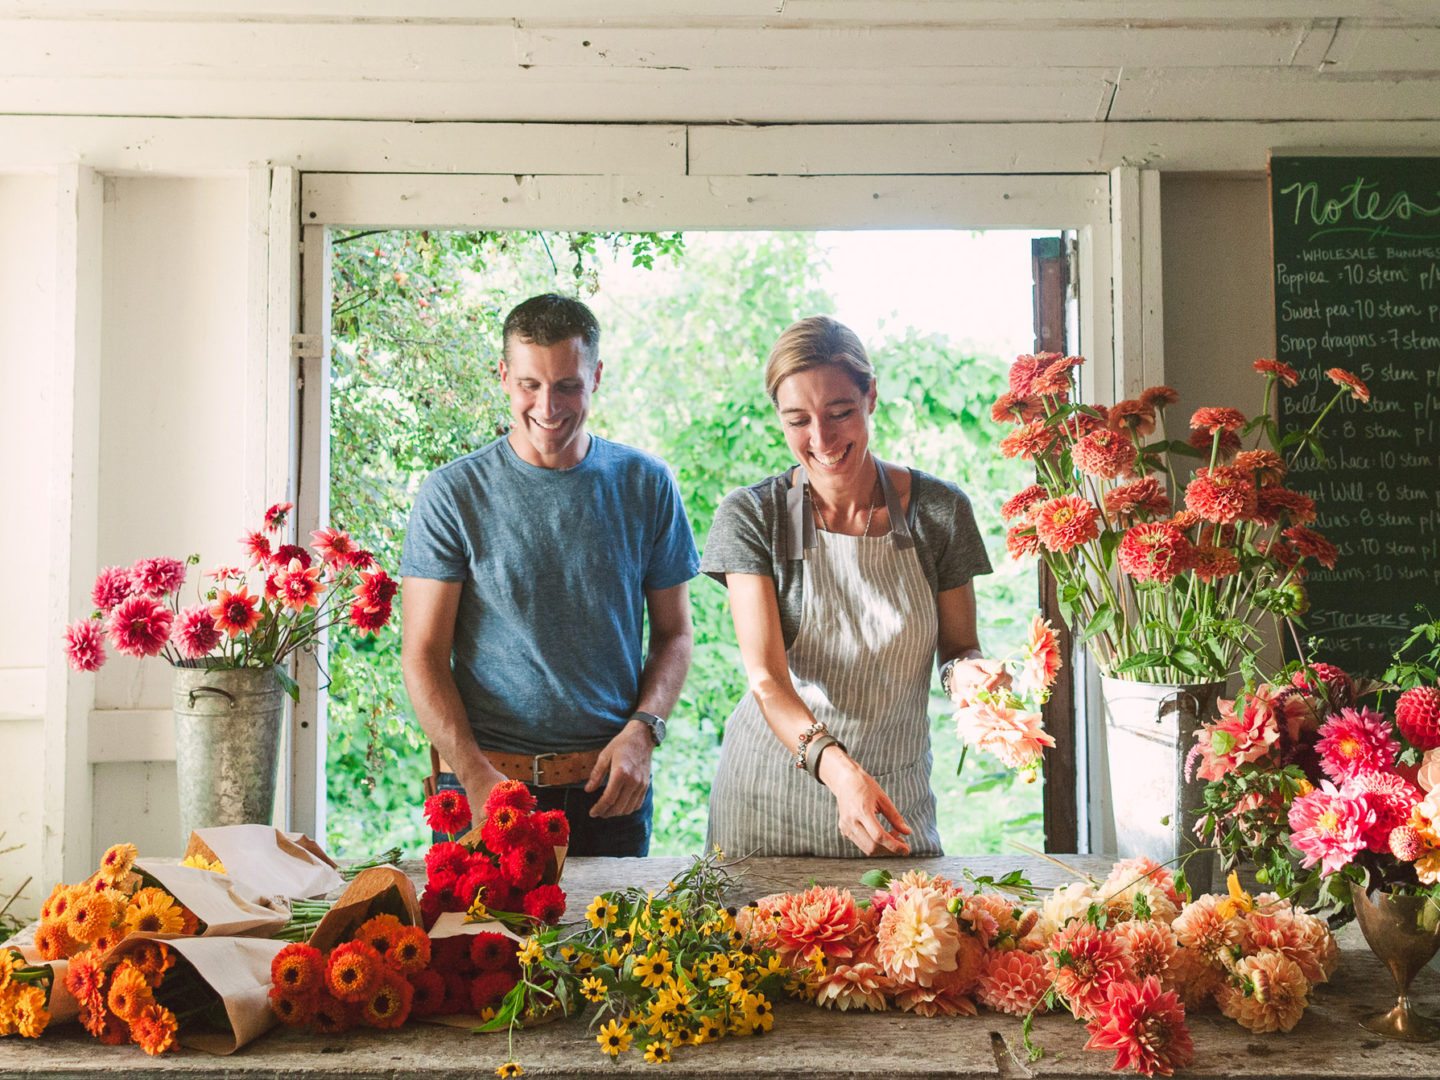 Erin and Chris Benzakein arranging flowers in the Floret studio